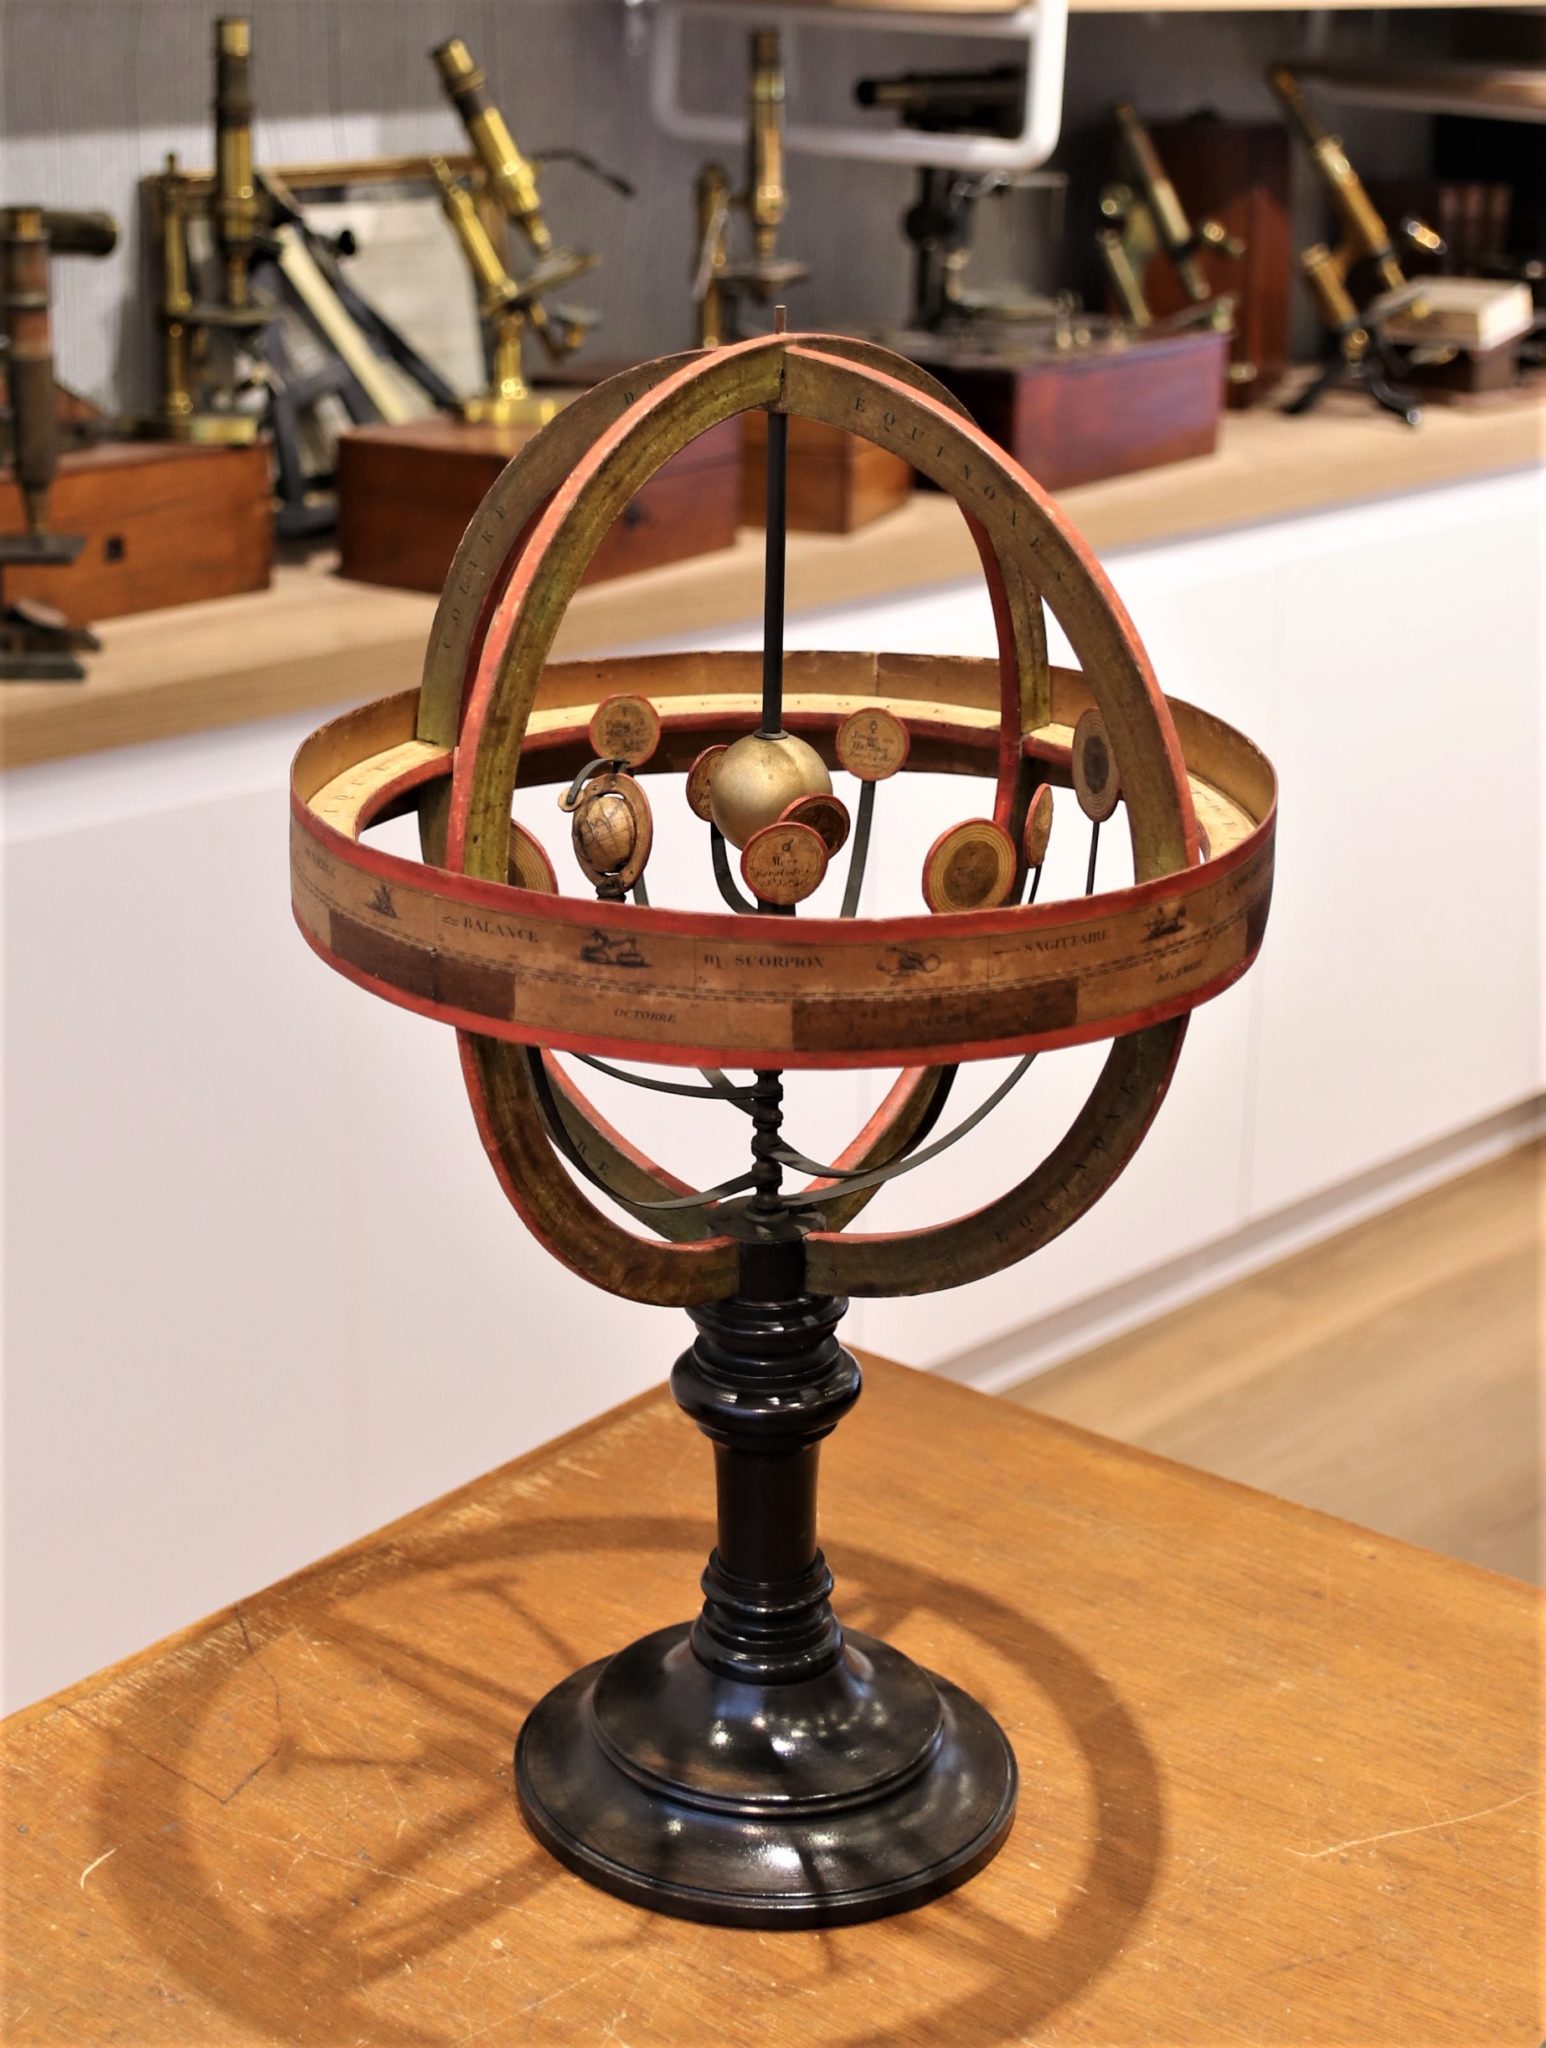 A French Copernician planetarium or orrery with 11 planets, certainly by Delamarche, circa 1810